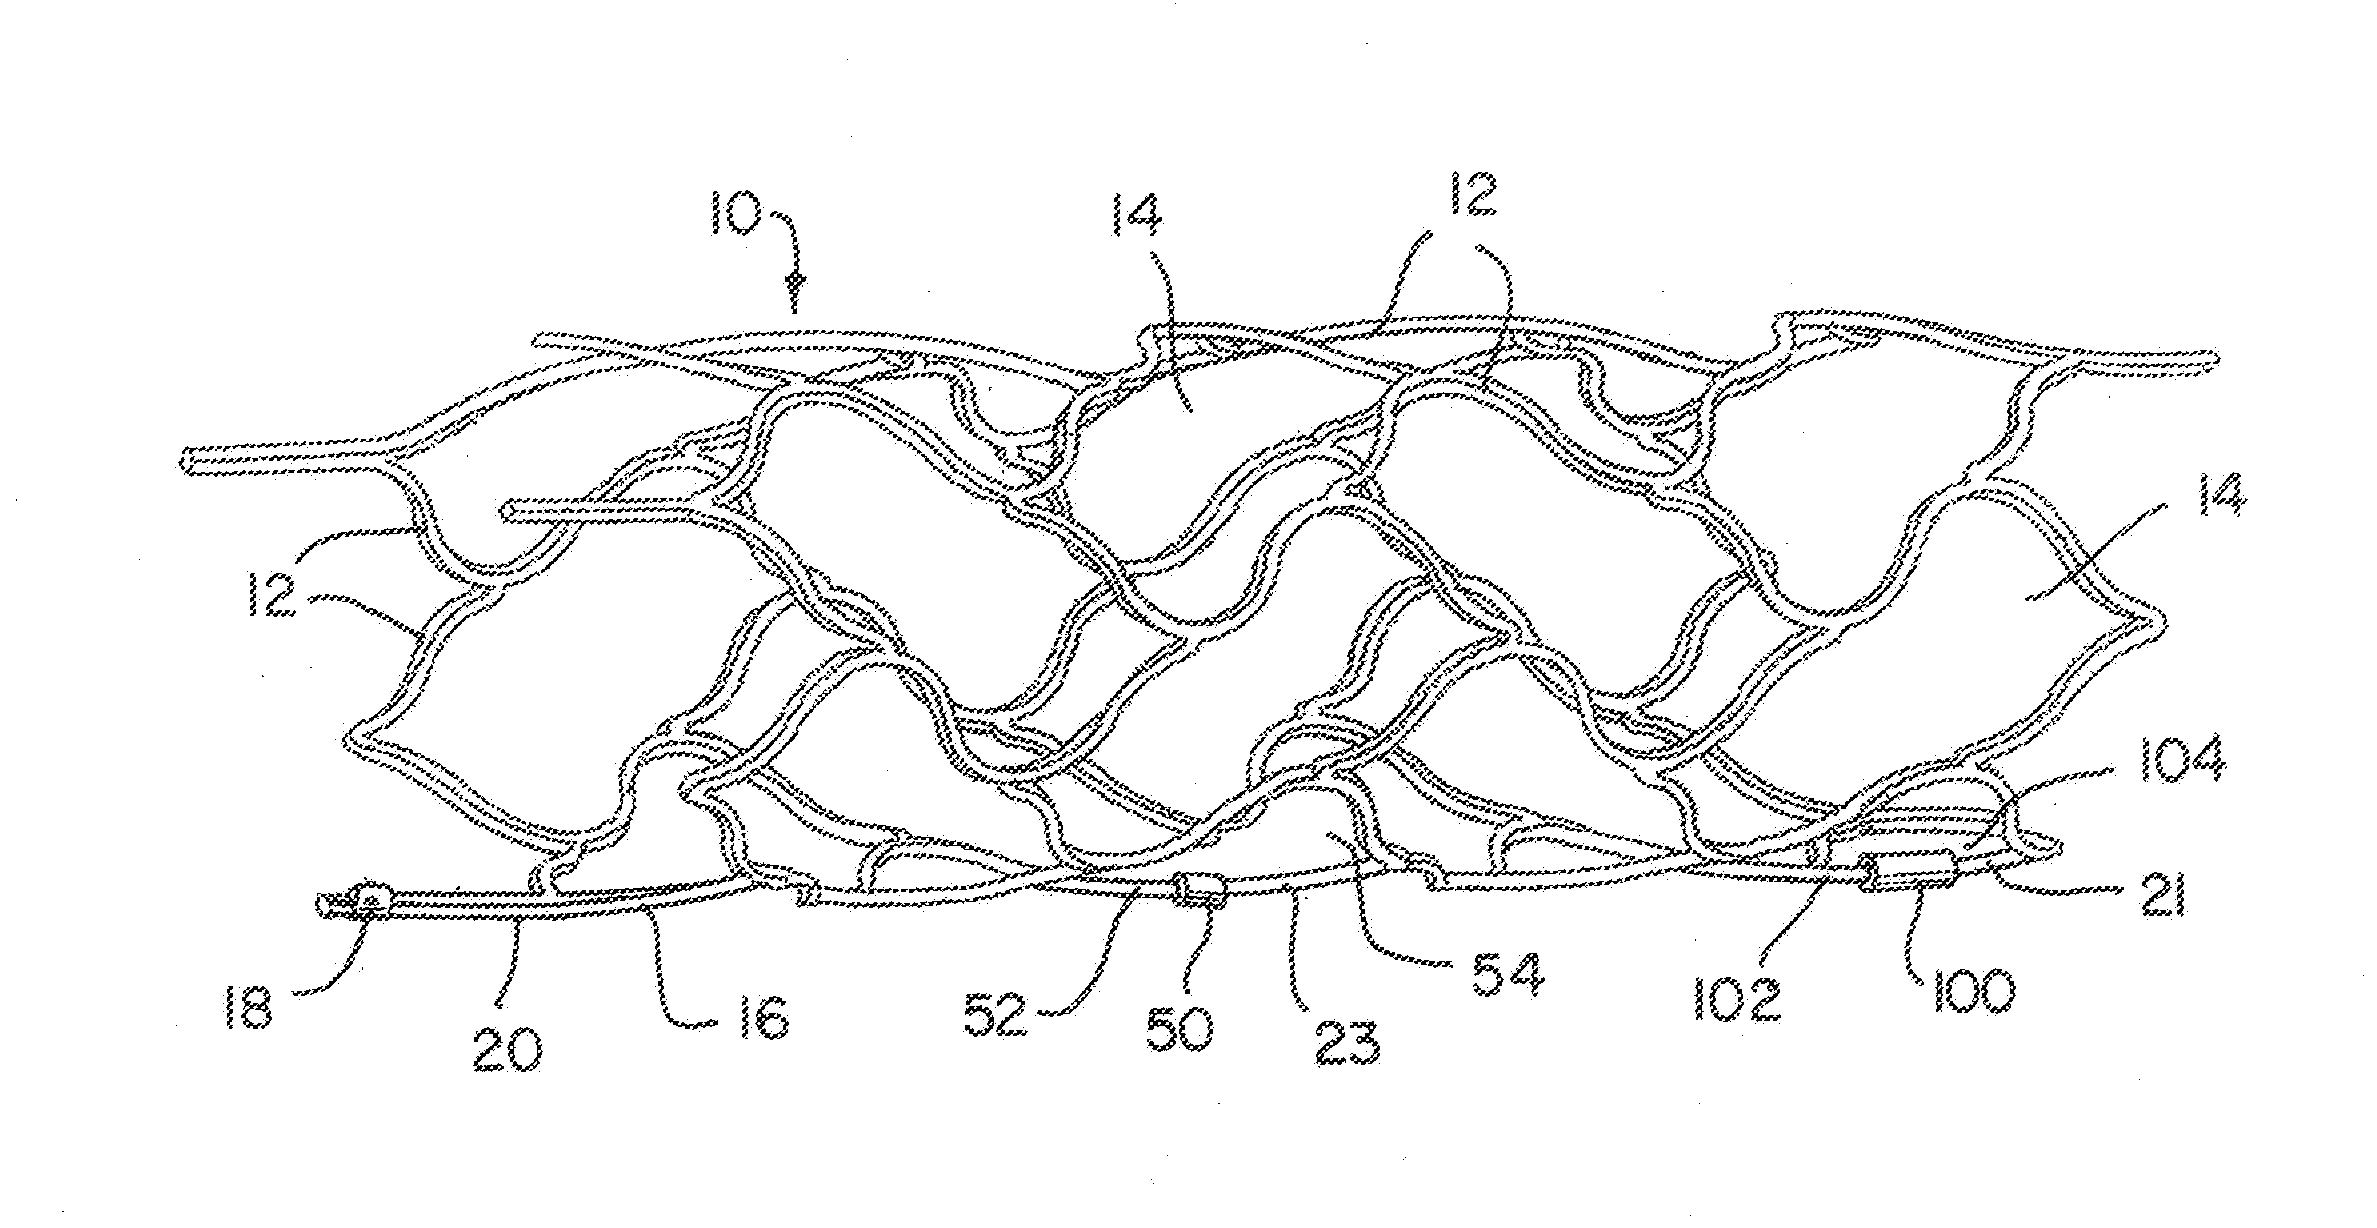 Radiopaque marker for vascular devices